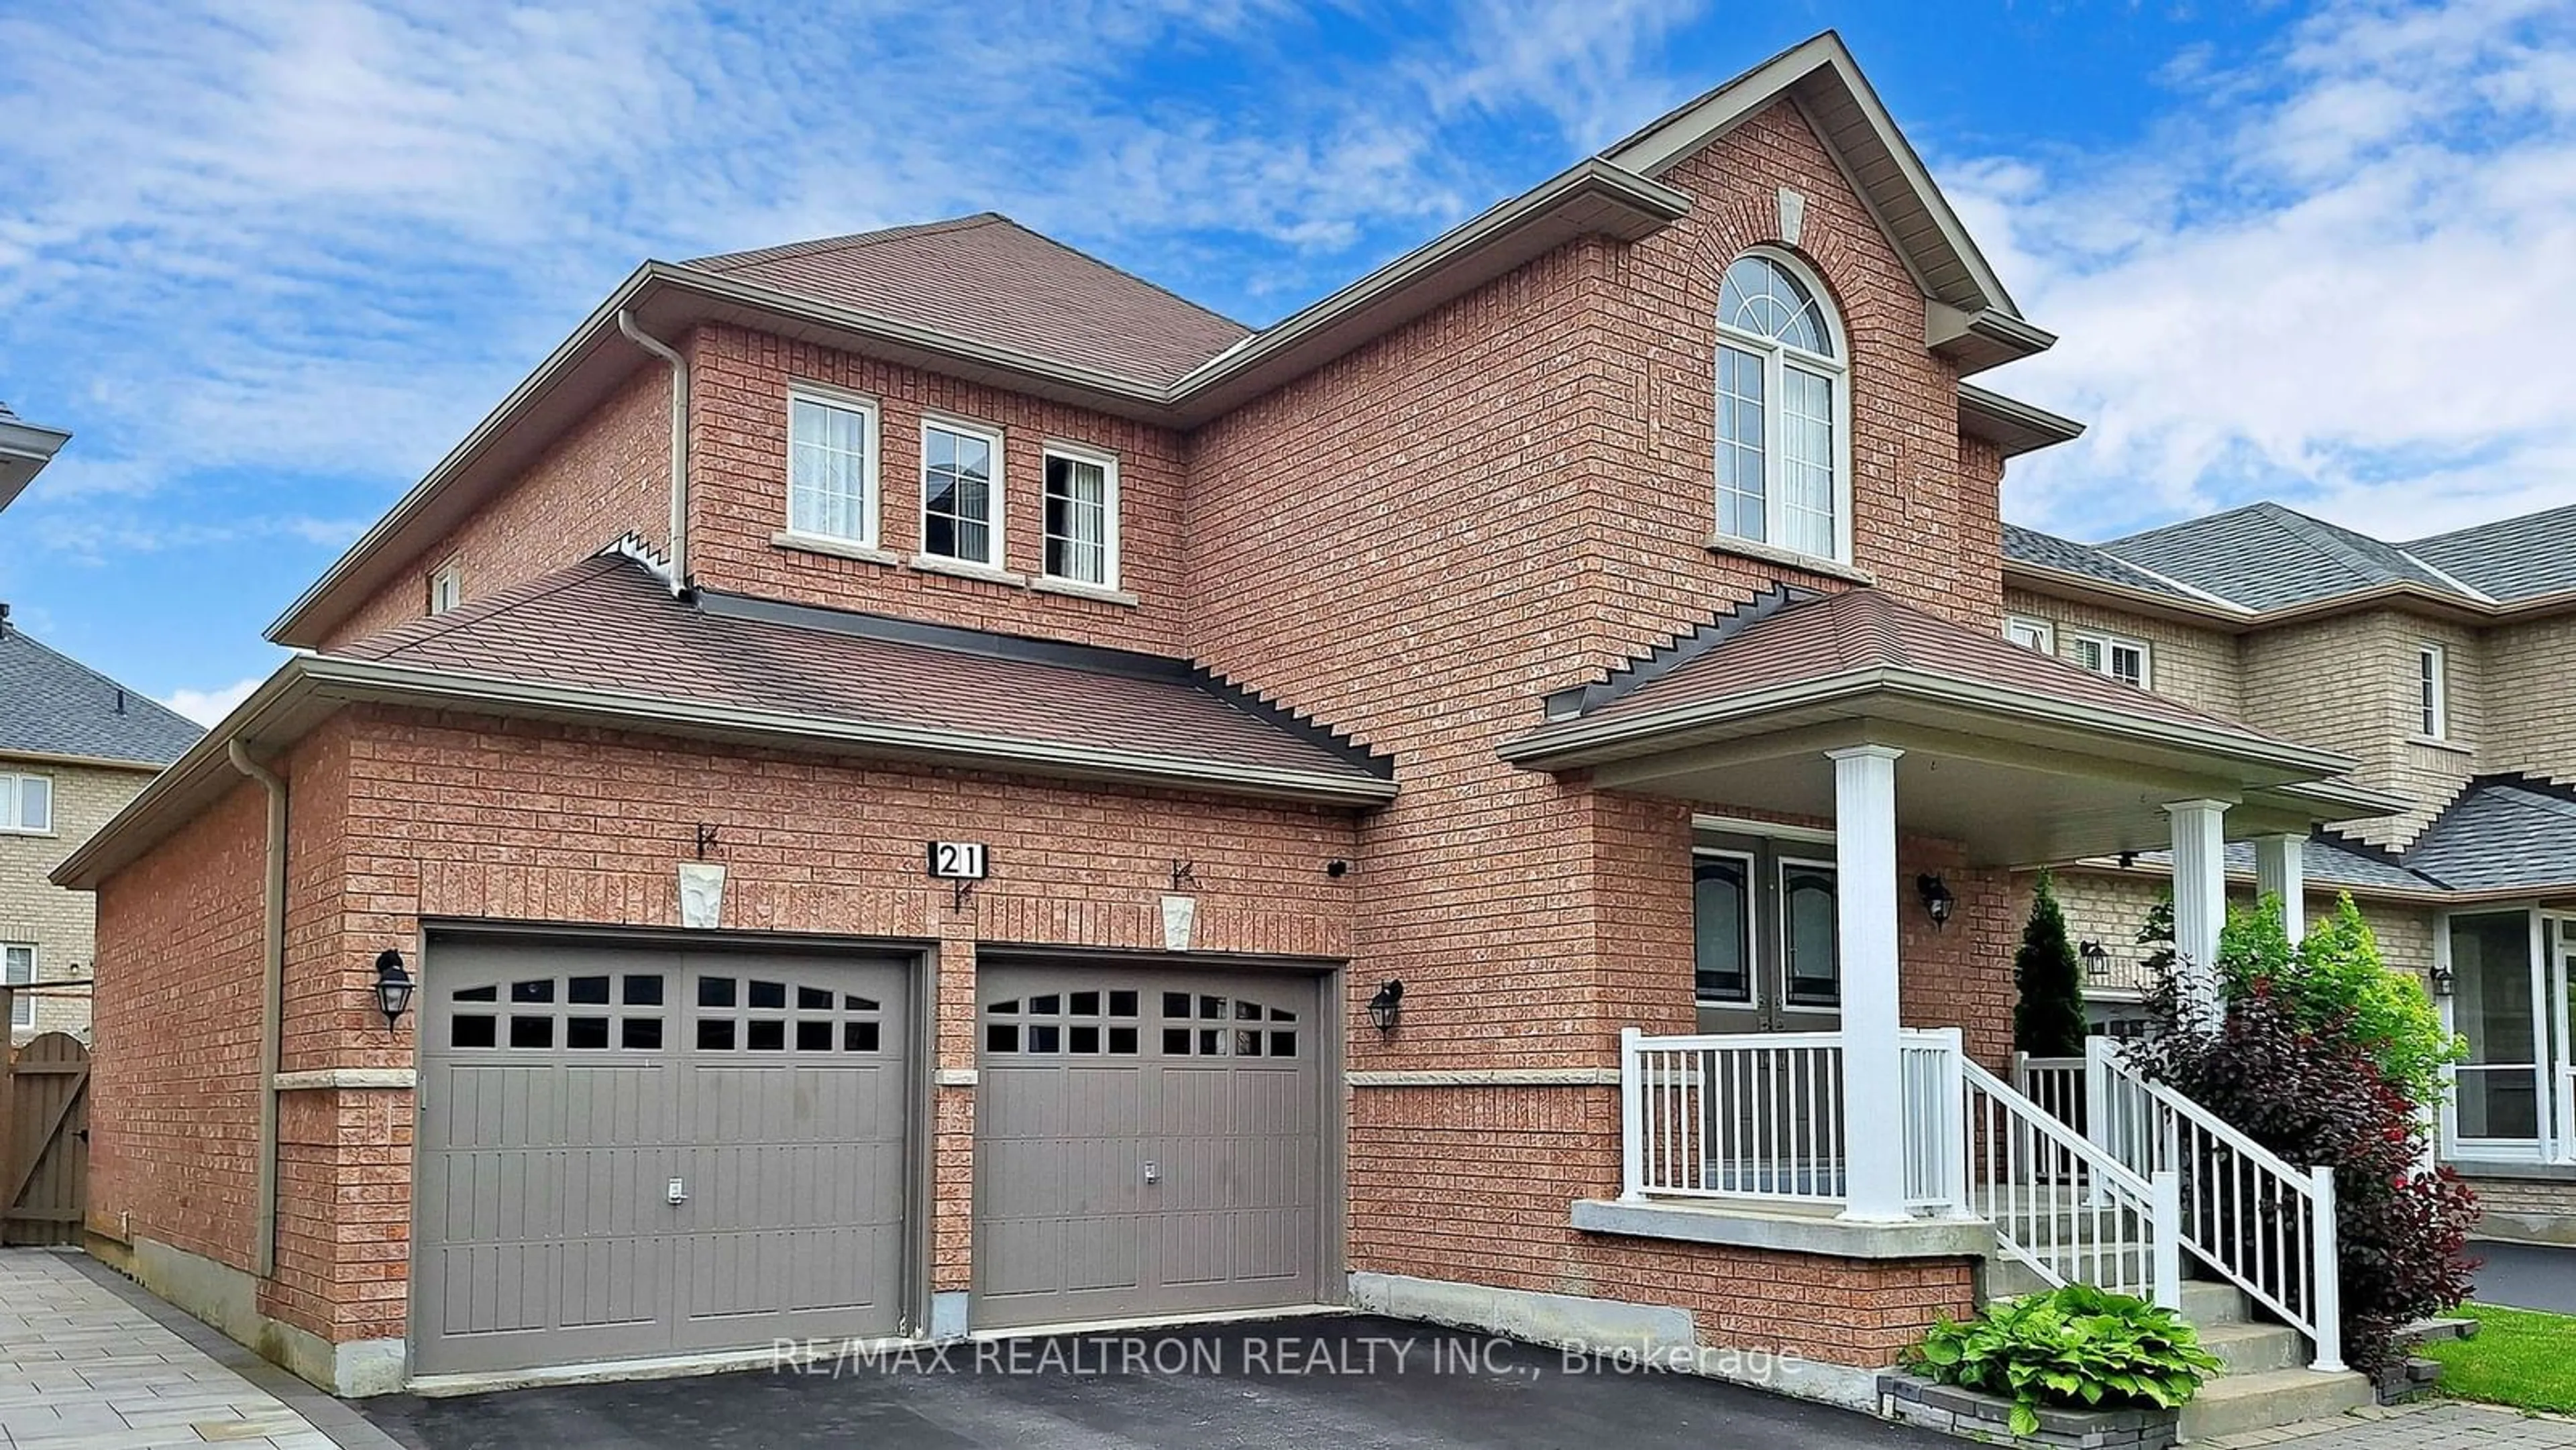 Home with brick exterior material for 21 Peterkin Rd, Markham Ontario L6E 1Y9